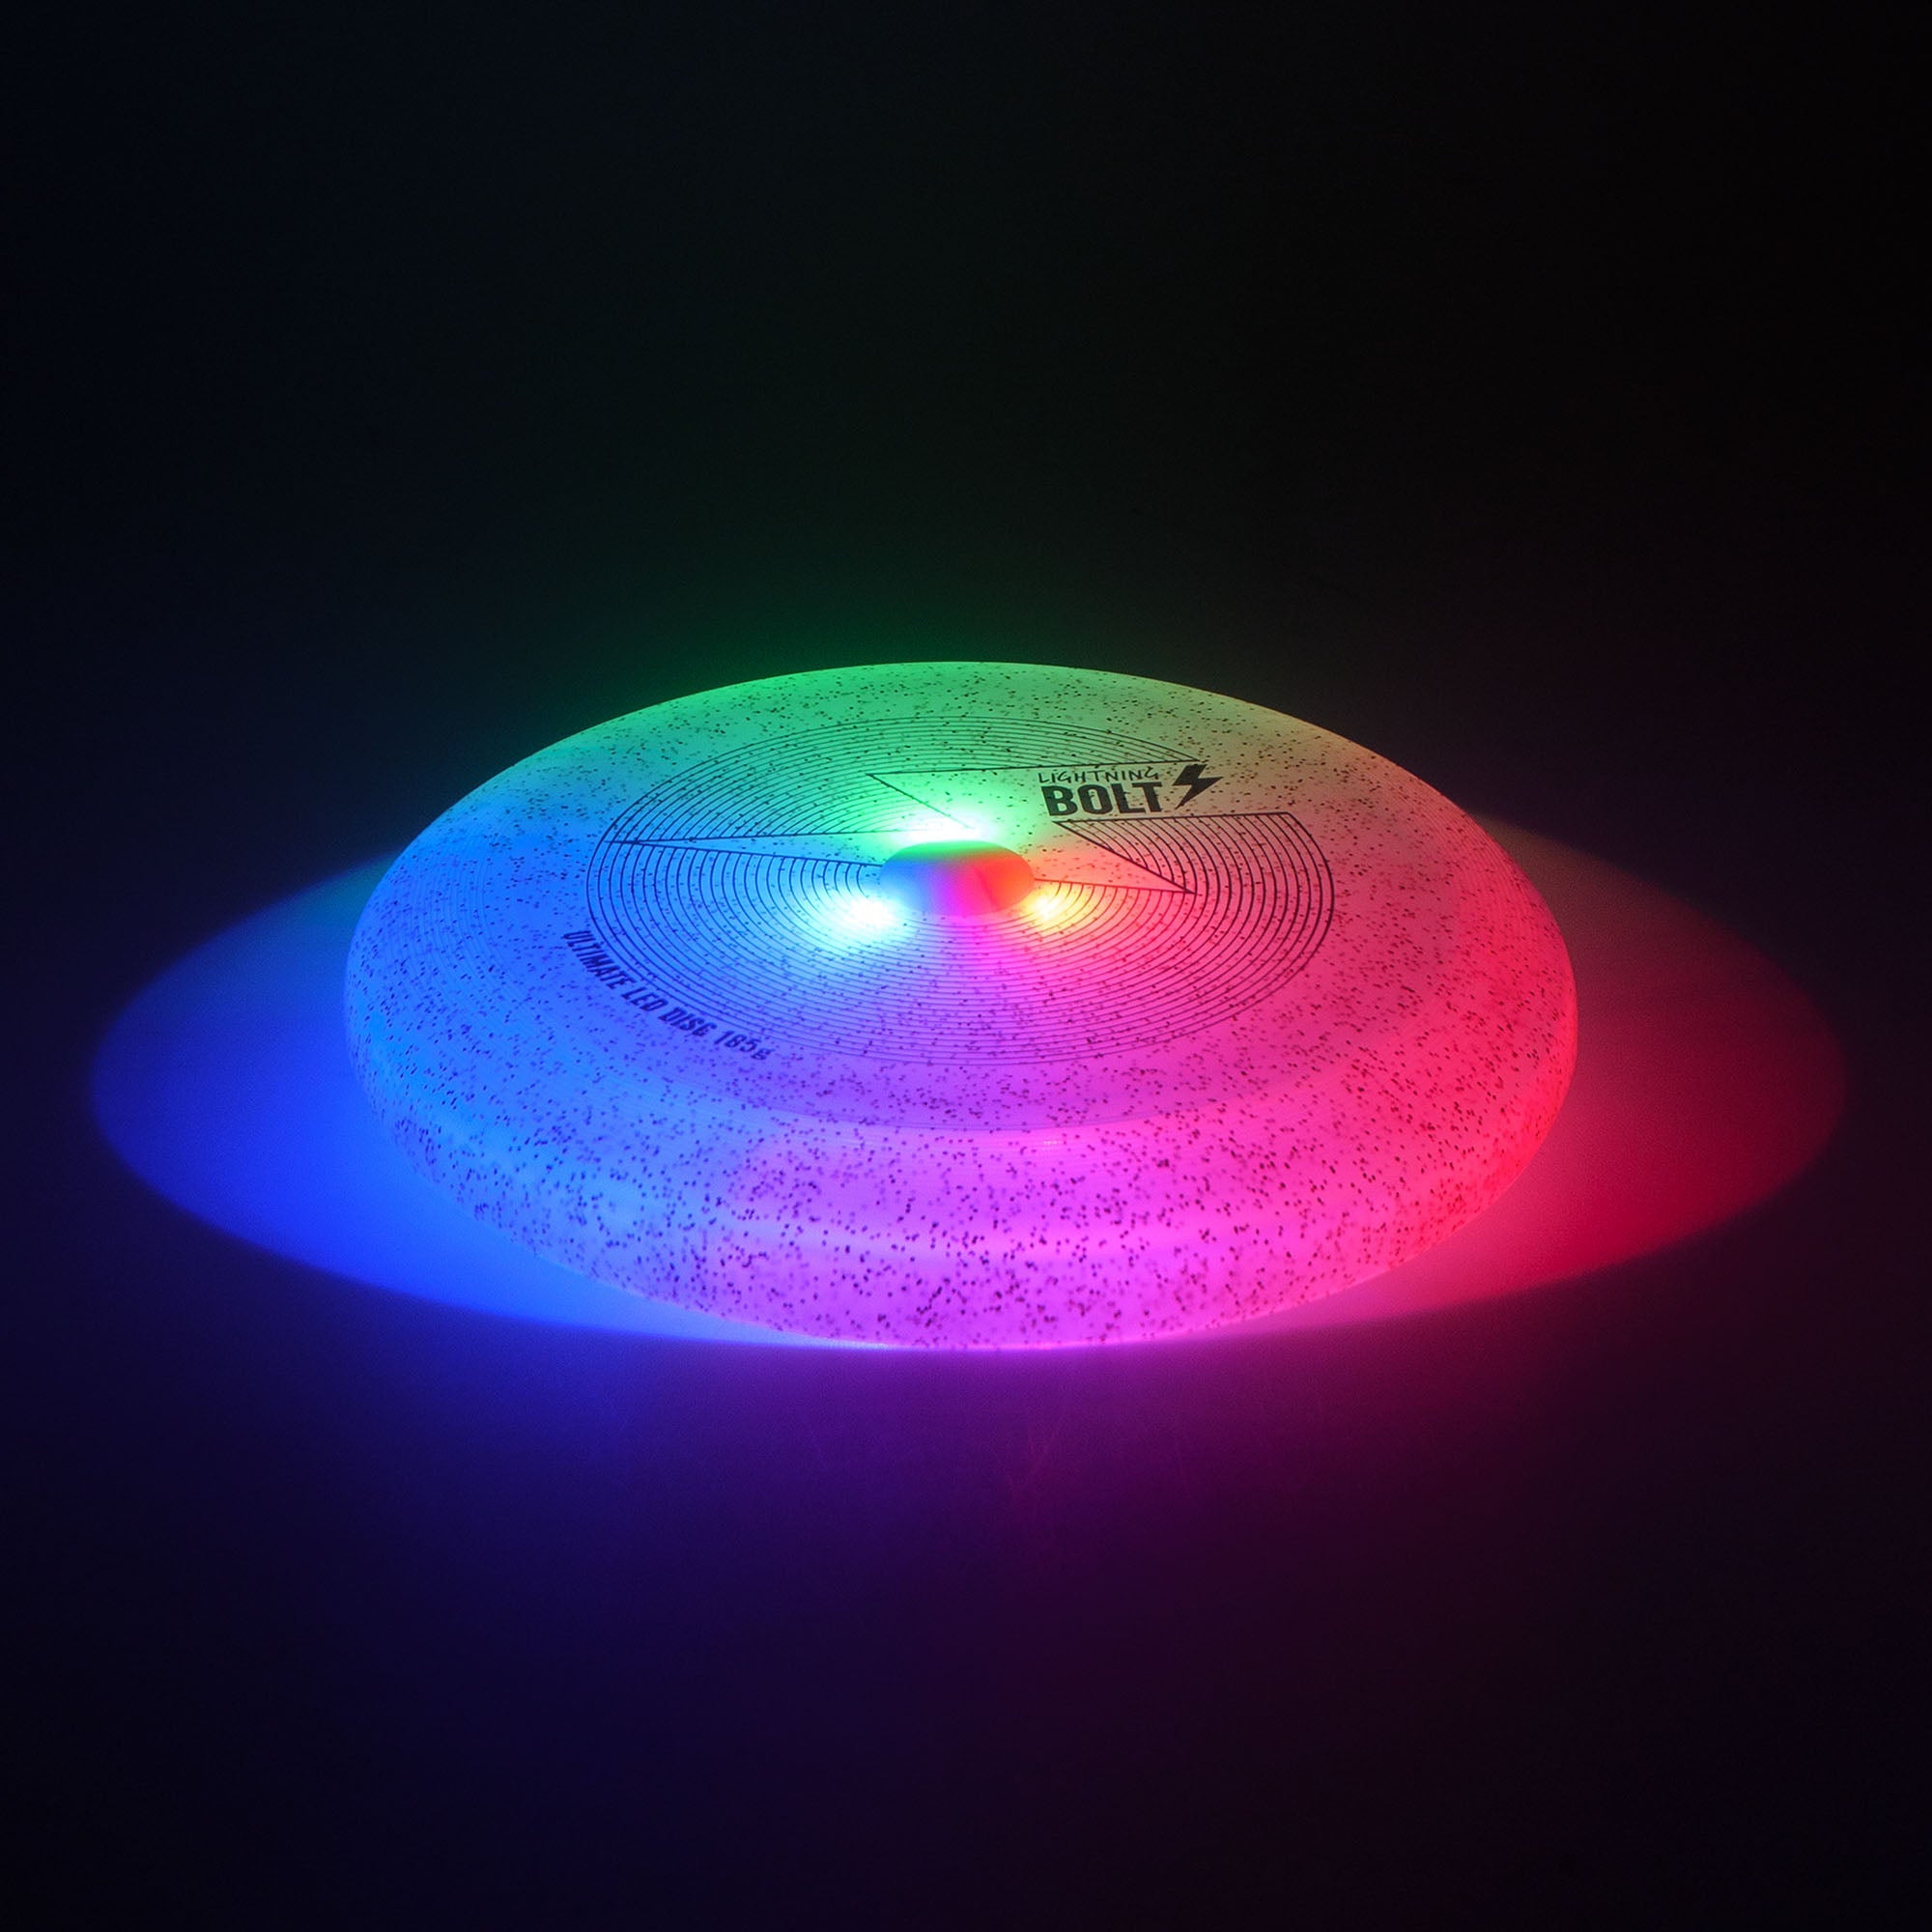 lighting bolt disc glowing red, blue and green on black background